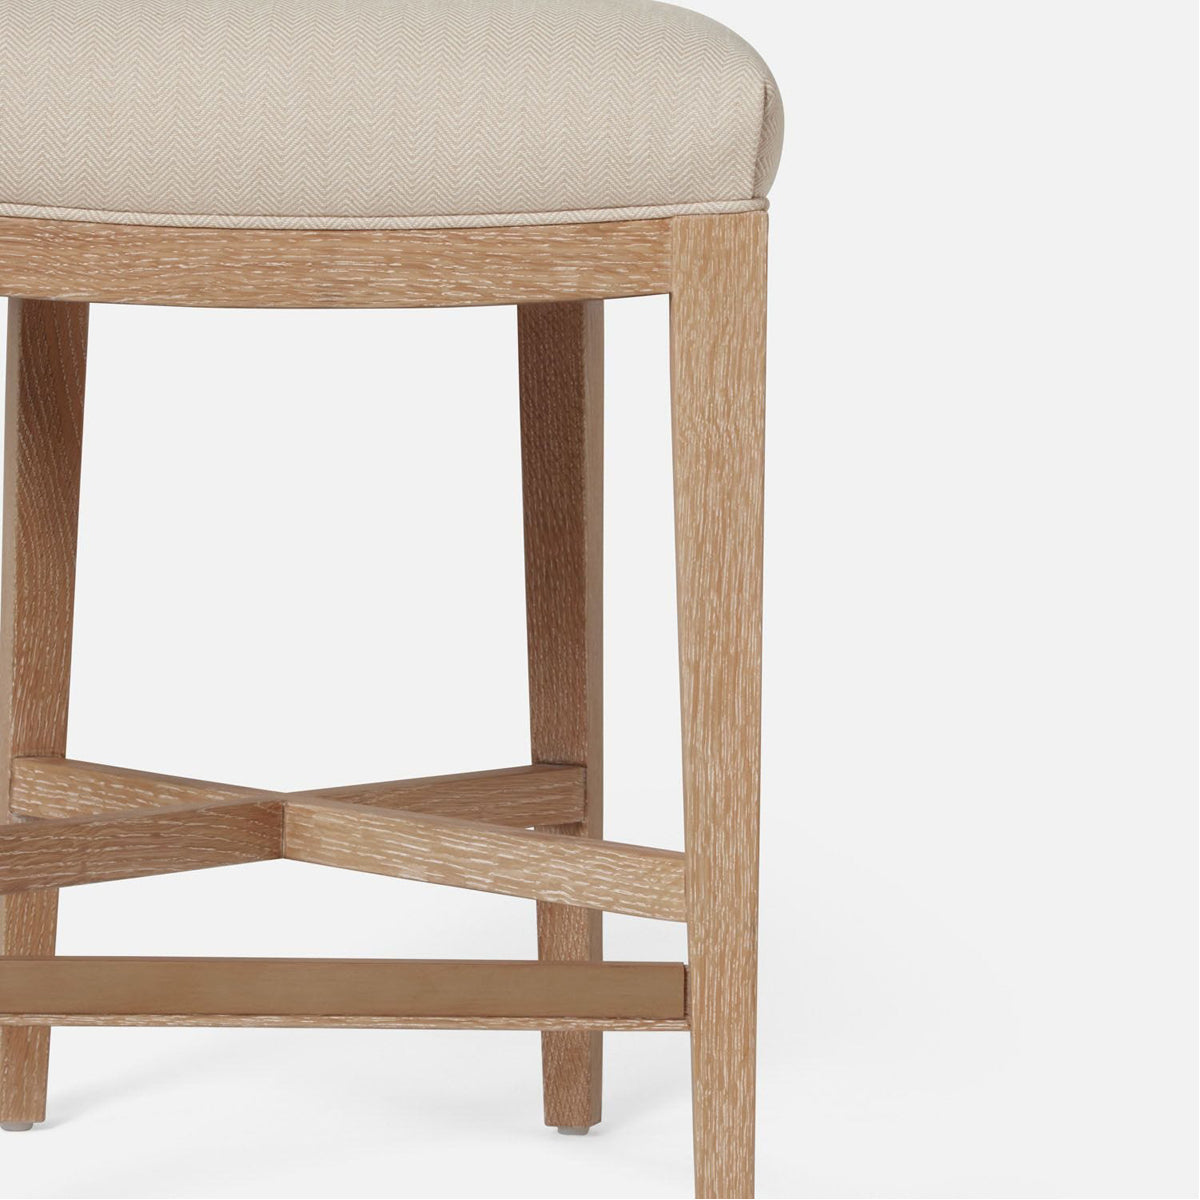 Made Goods Carleen Wingback Cane Counter Stool in Arno Fabric